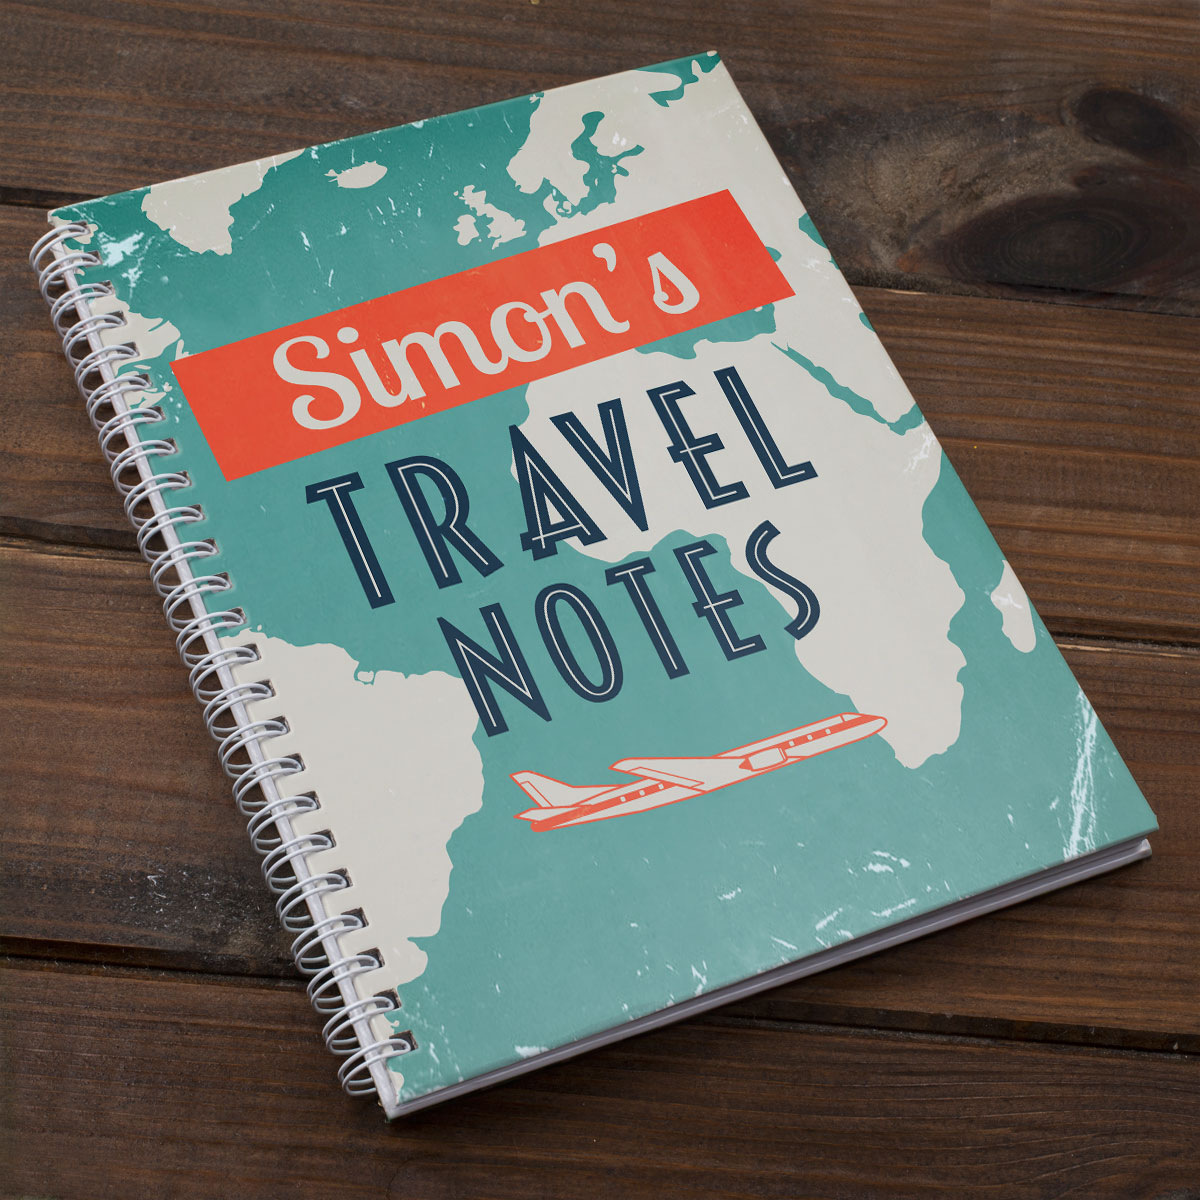 Personalised Notebook - Travel Notes